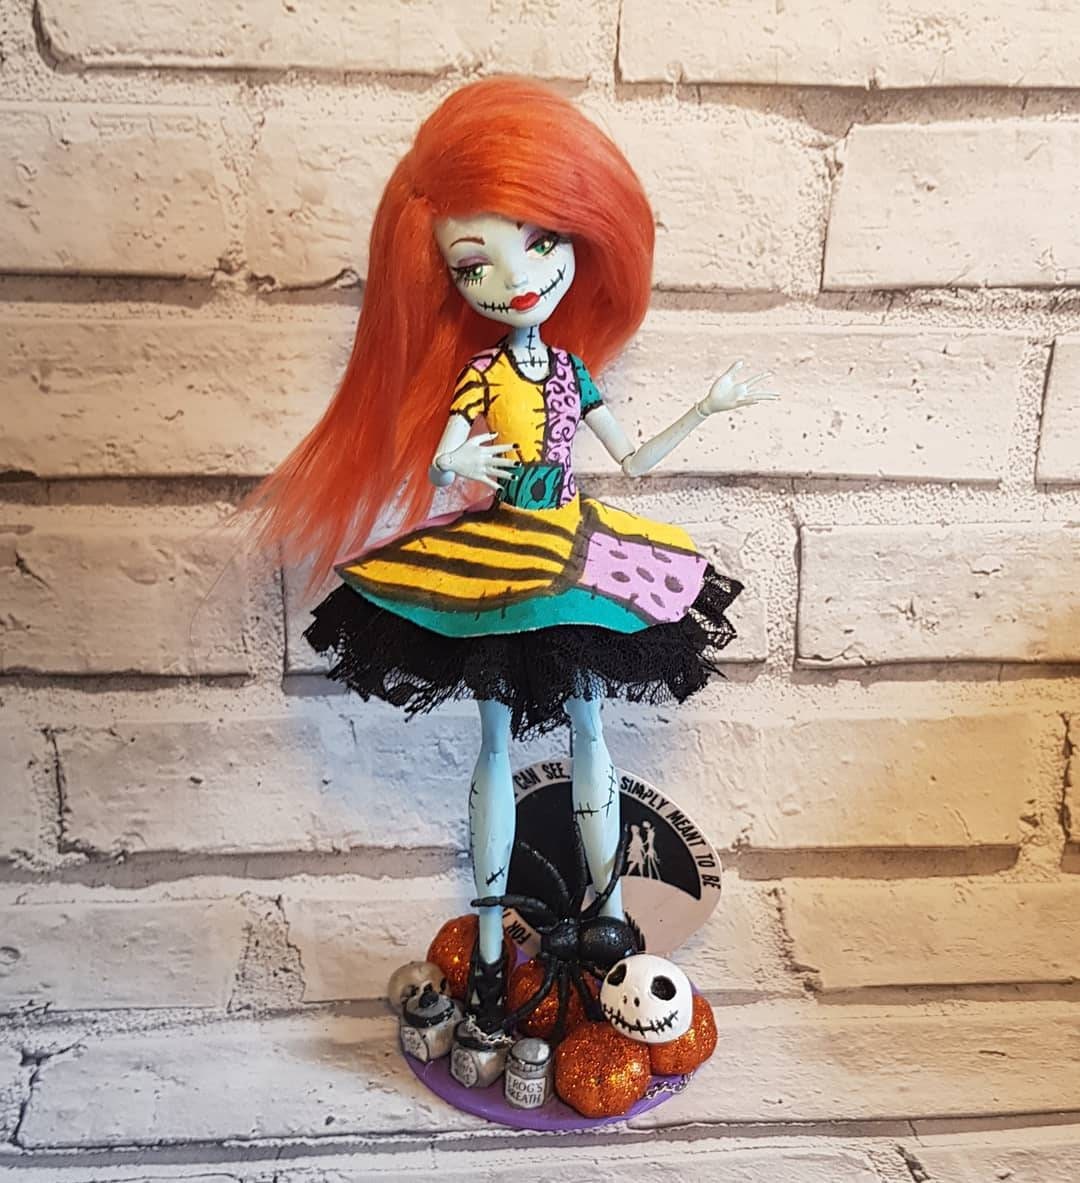 Announcing Monster High Nightmare Before Christmas Jack & Sally Dolls